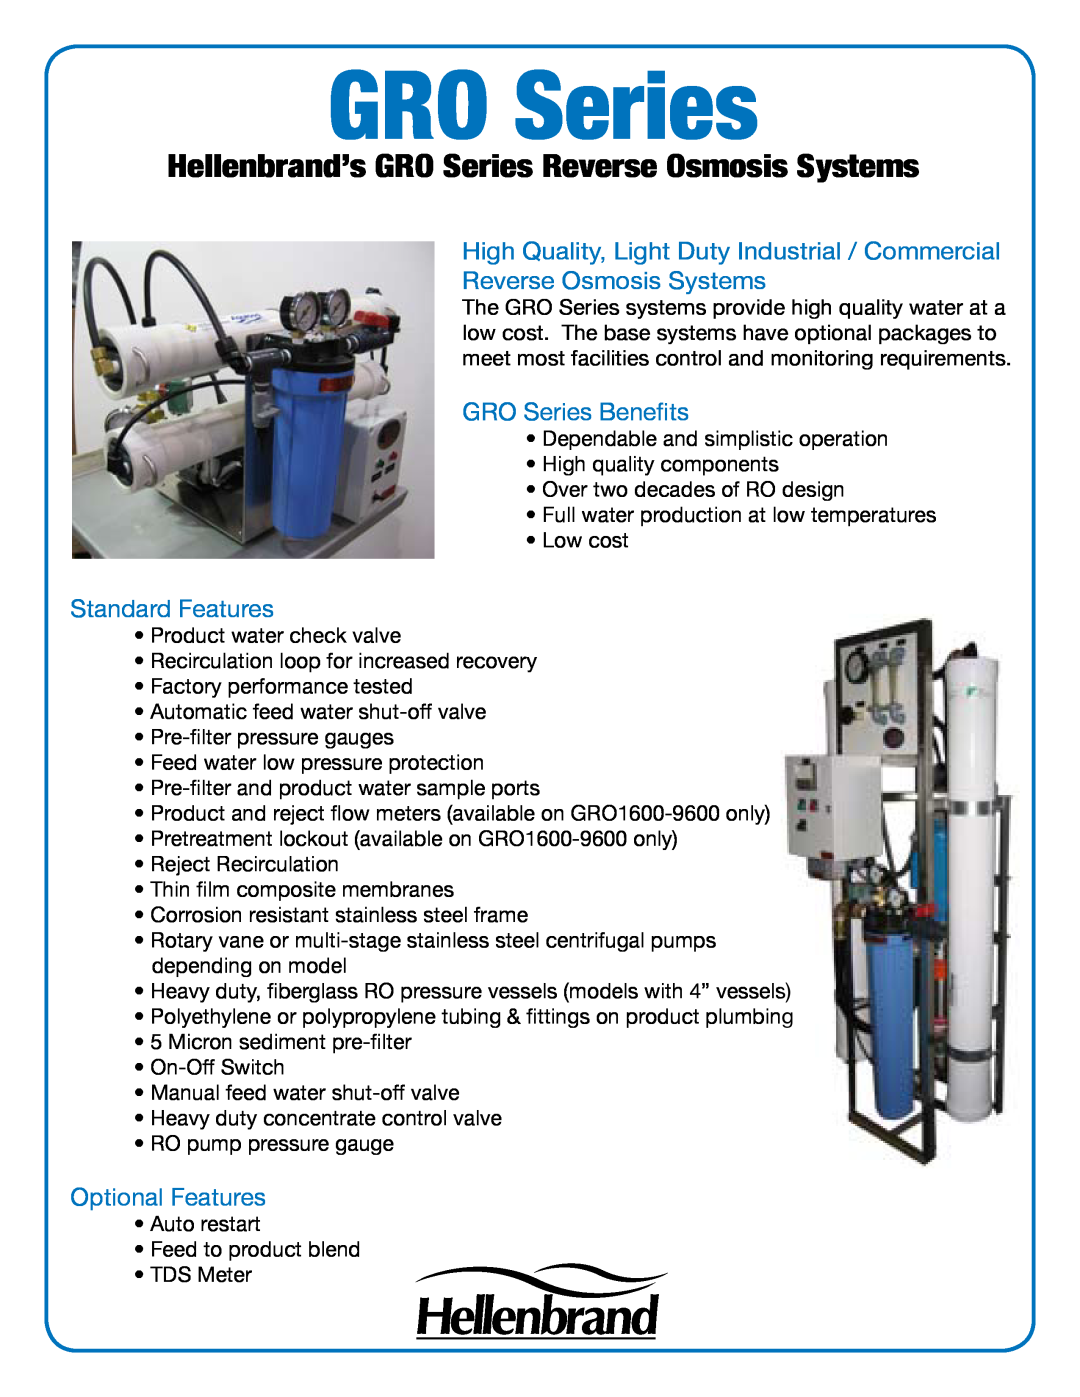 Hellenbrand GRO Series manual High Quality, Light Duty Industrial / Commercial, Reverse Osmosis Systems, Standard Features 